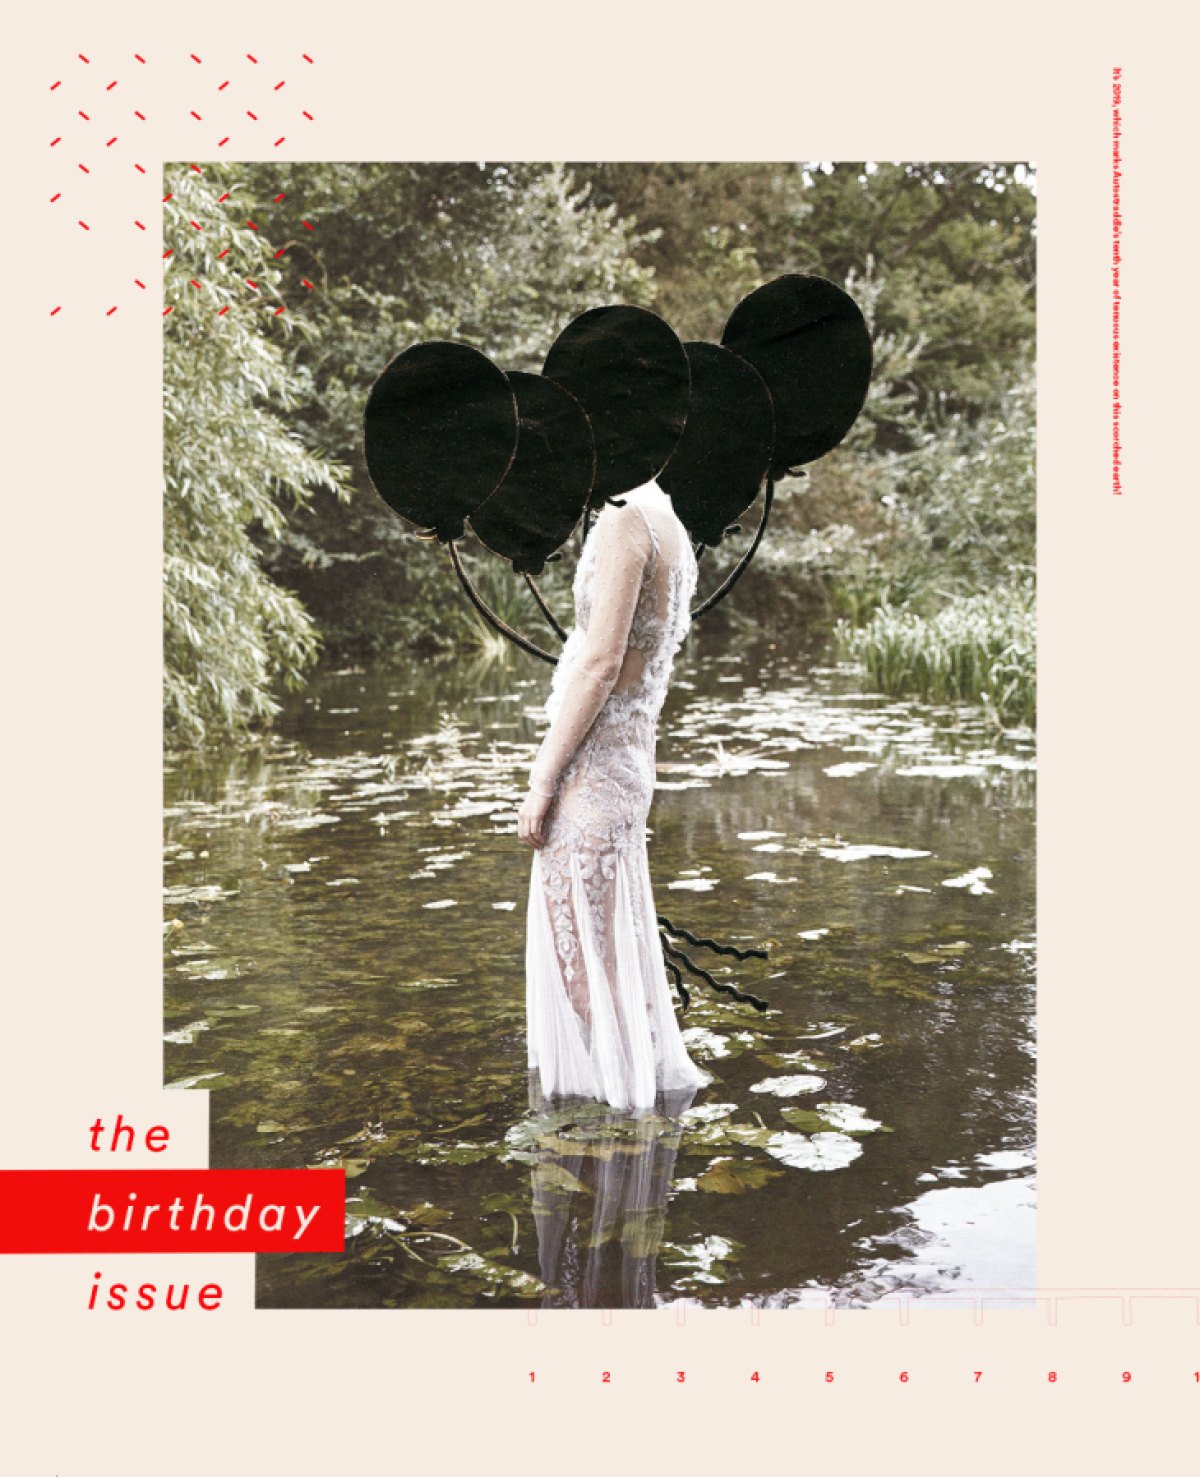 the birthday issue [graphic is a woman standing in the water, head is covered in black balloons]